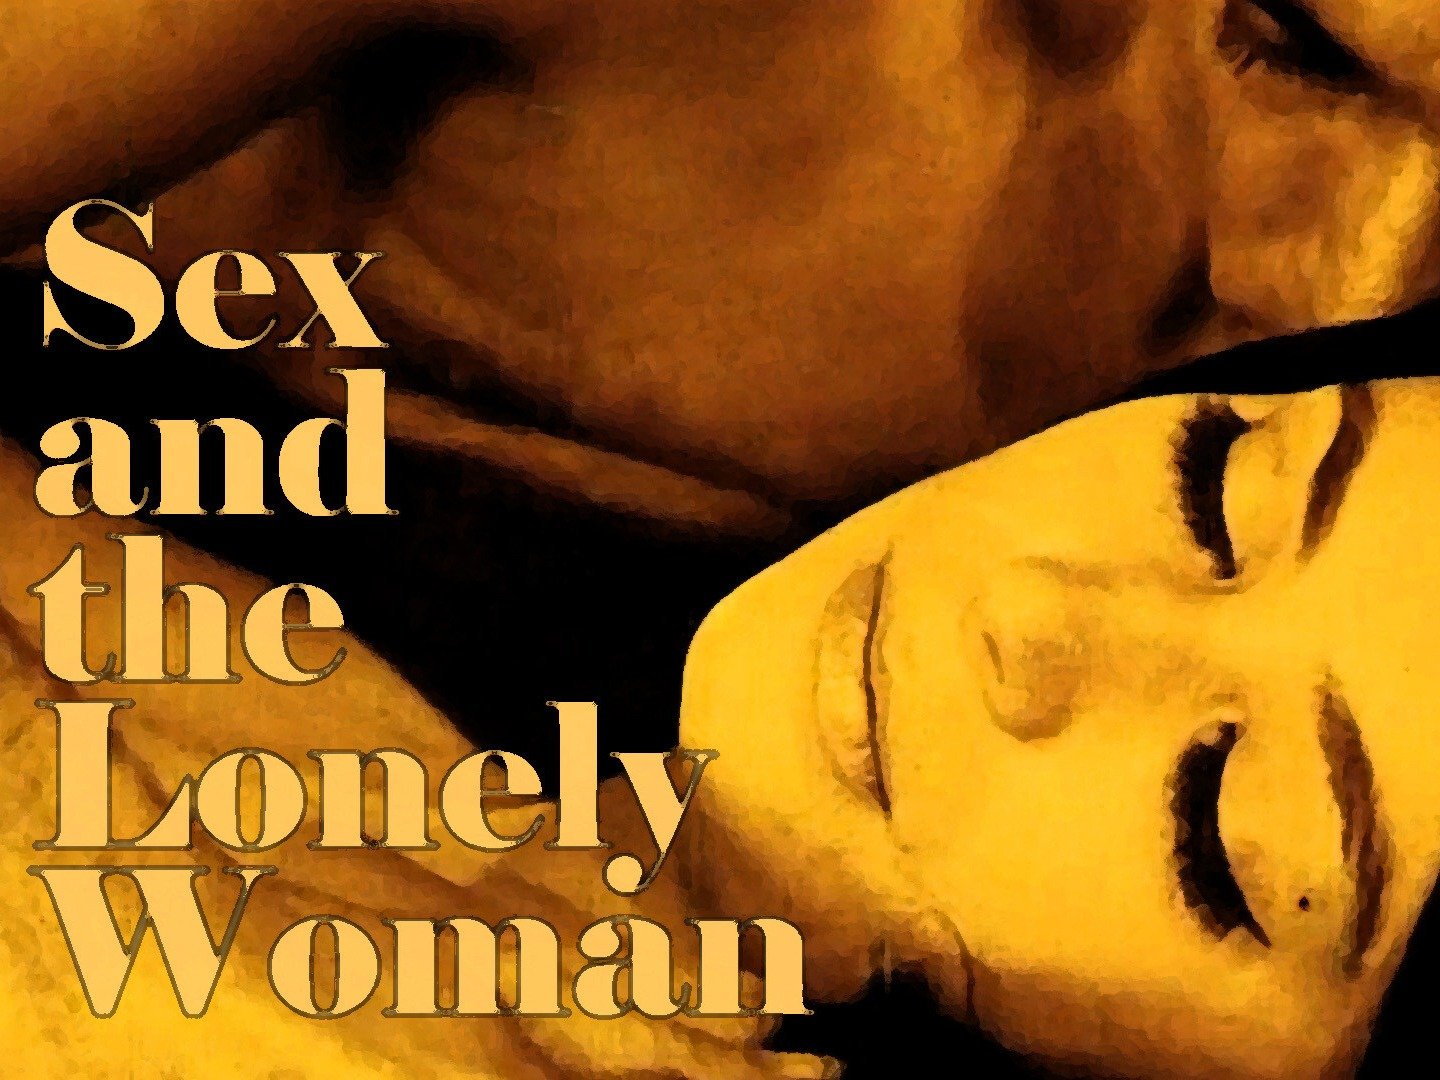 Sex and the Lonely Woman image